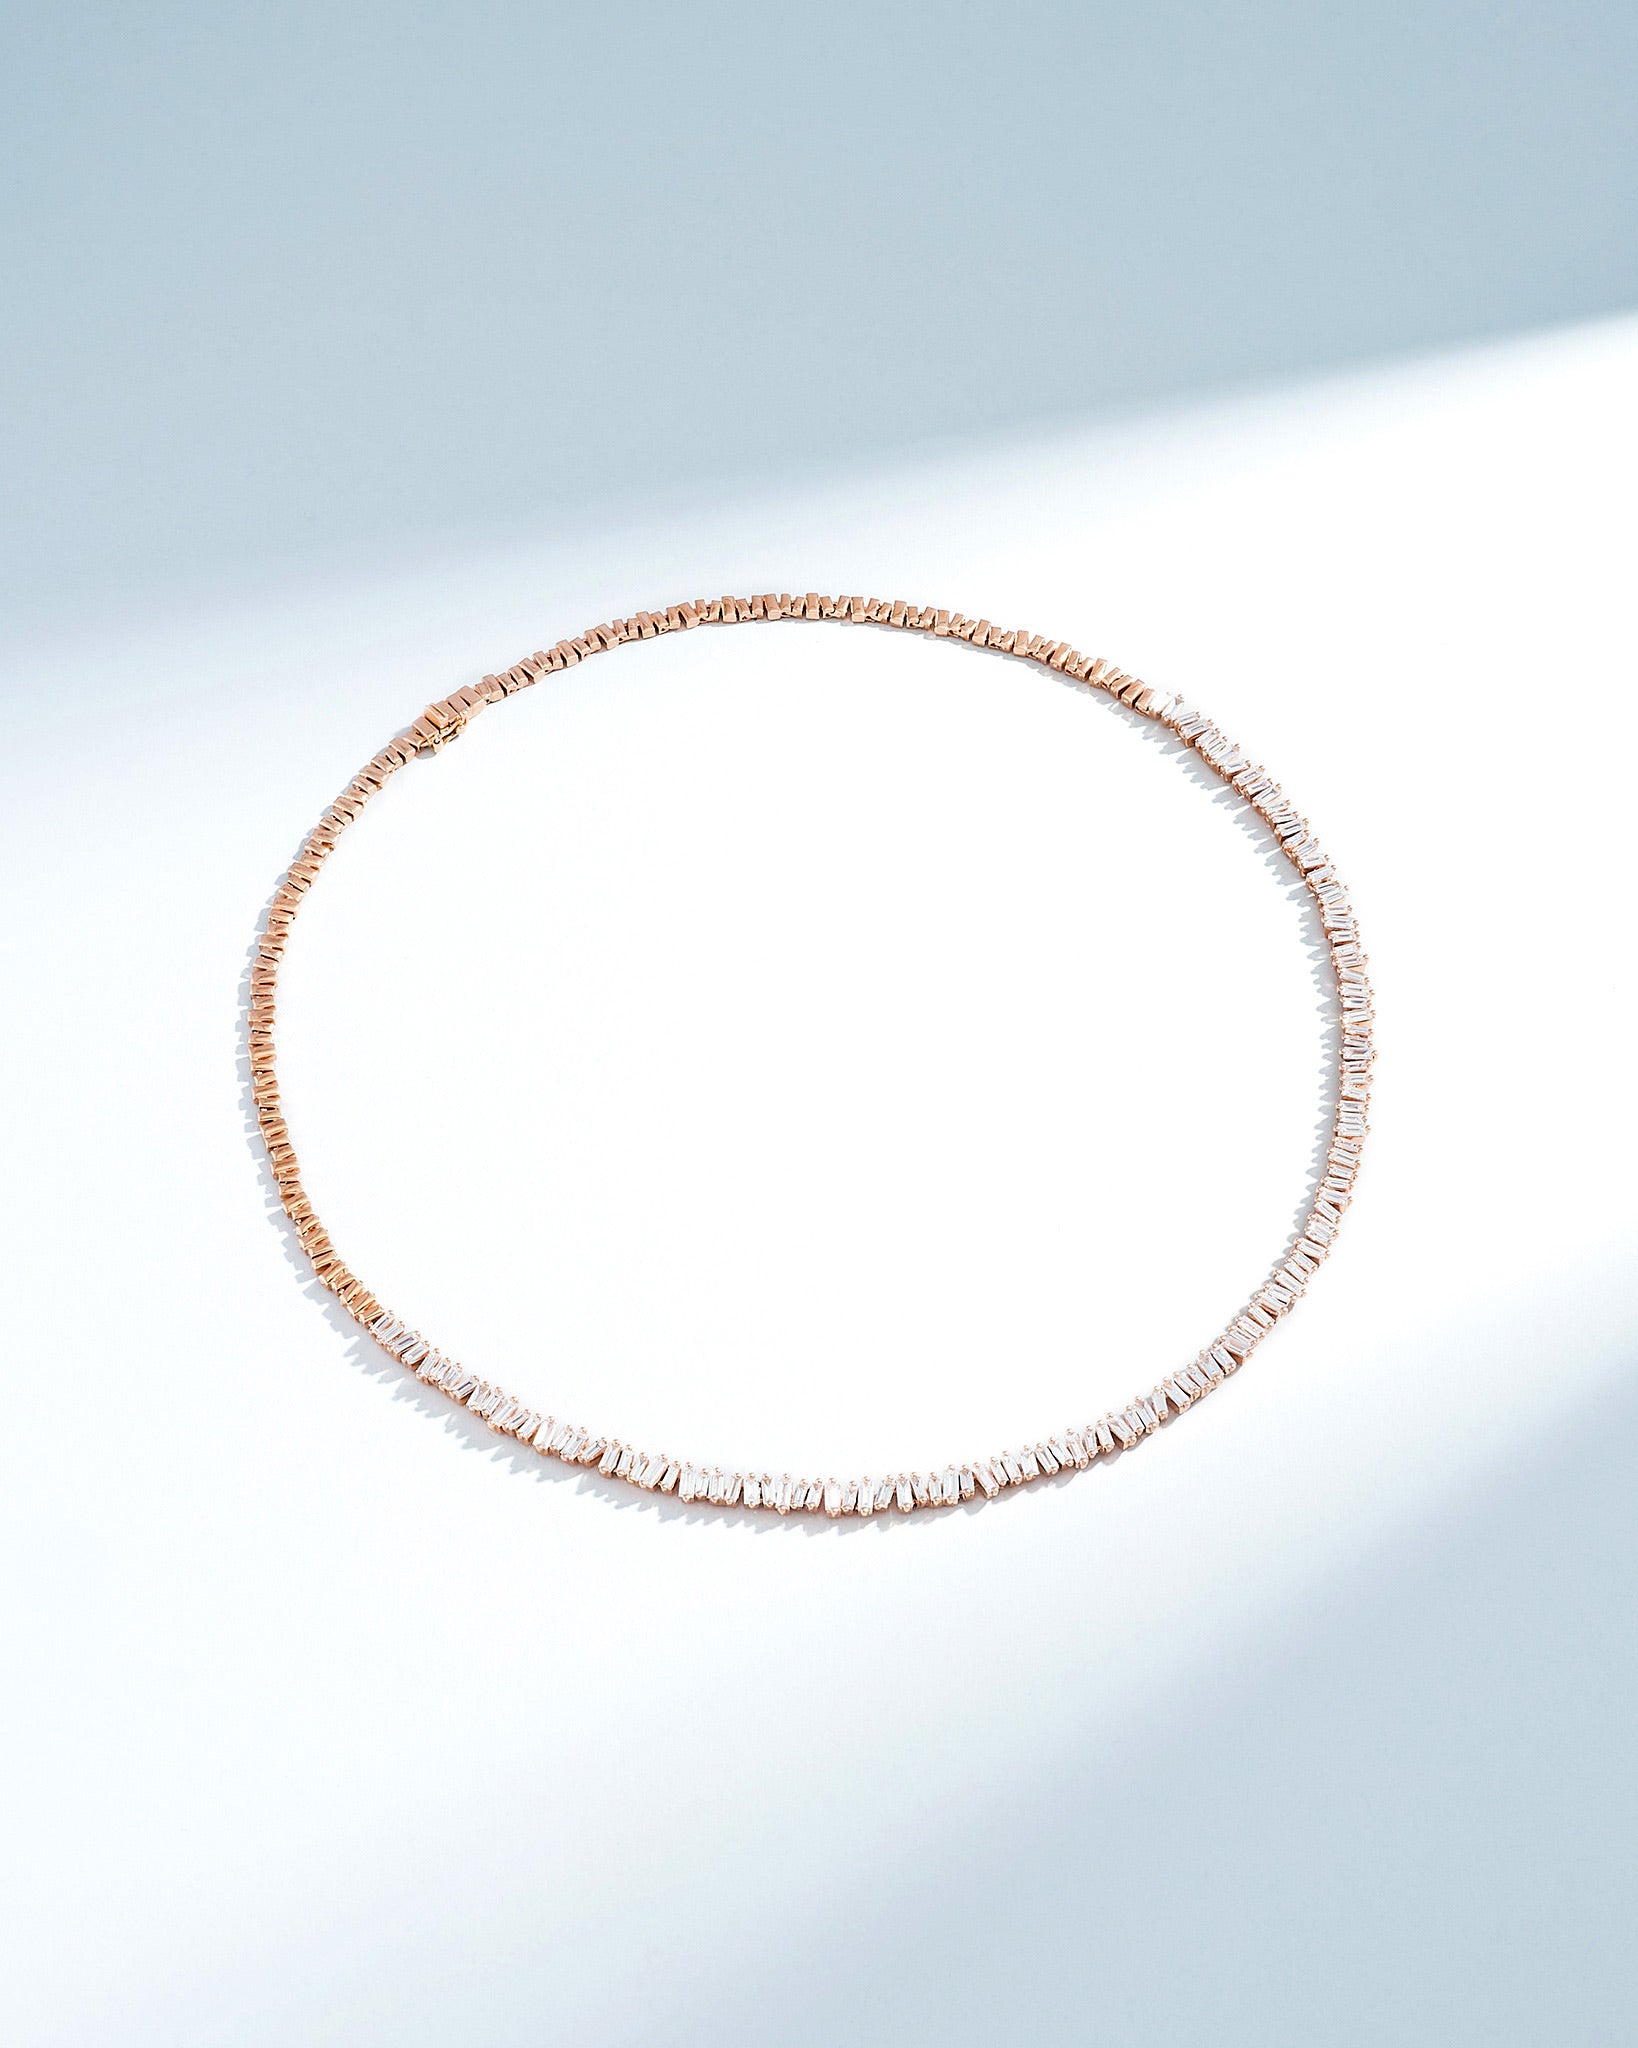 Suzanne Kalan Classic Diamond Tennis Necklace in 18k rose gold